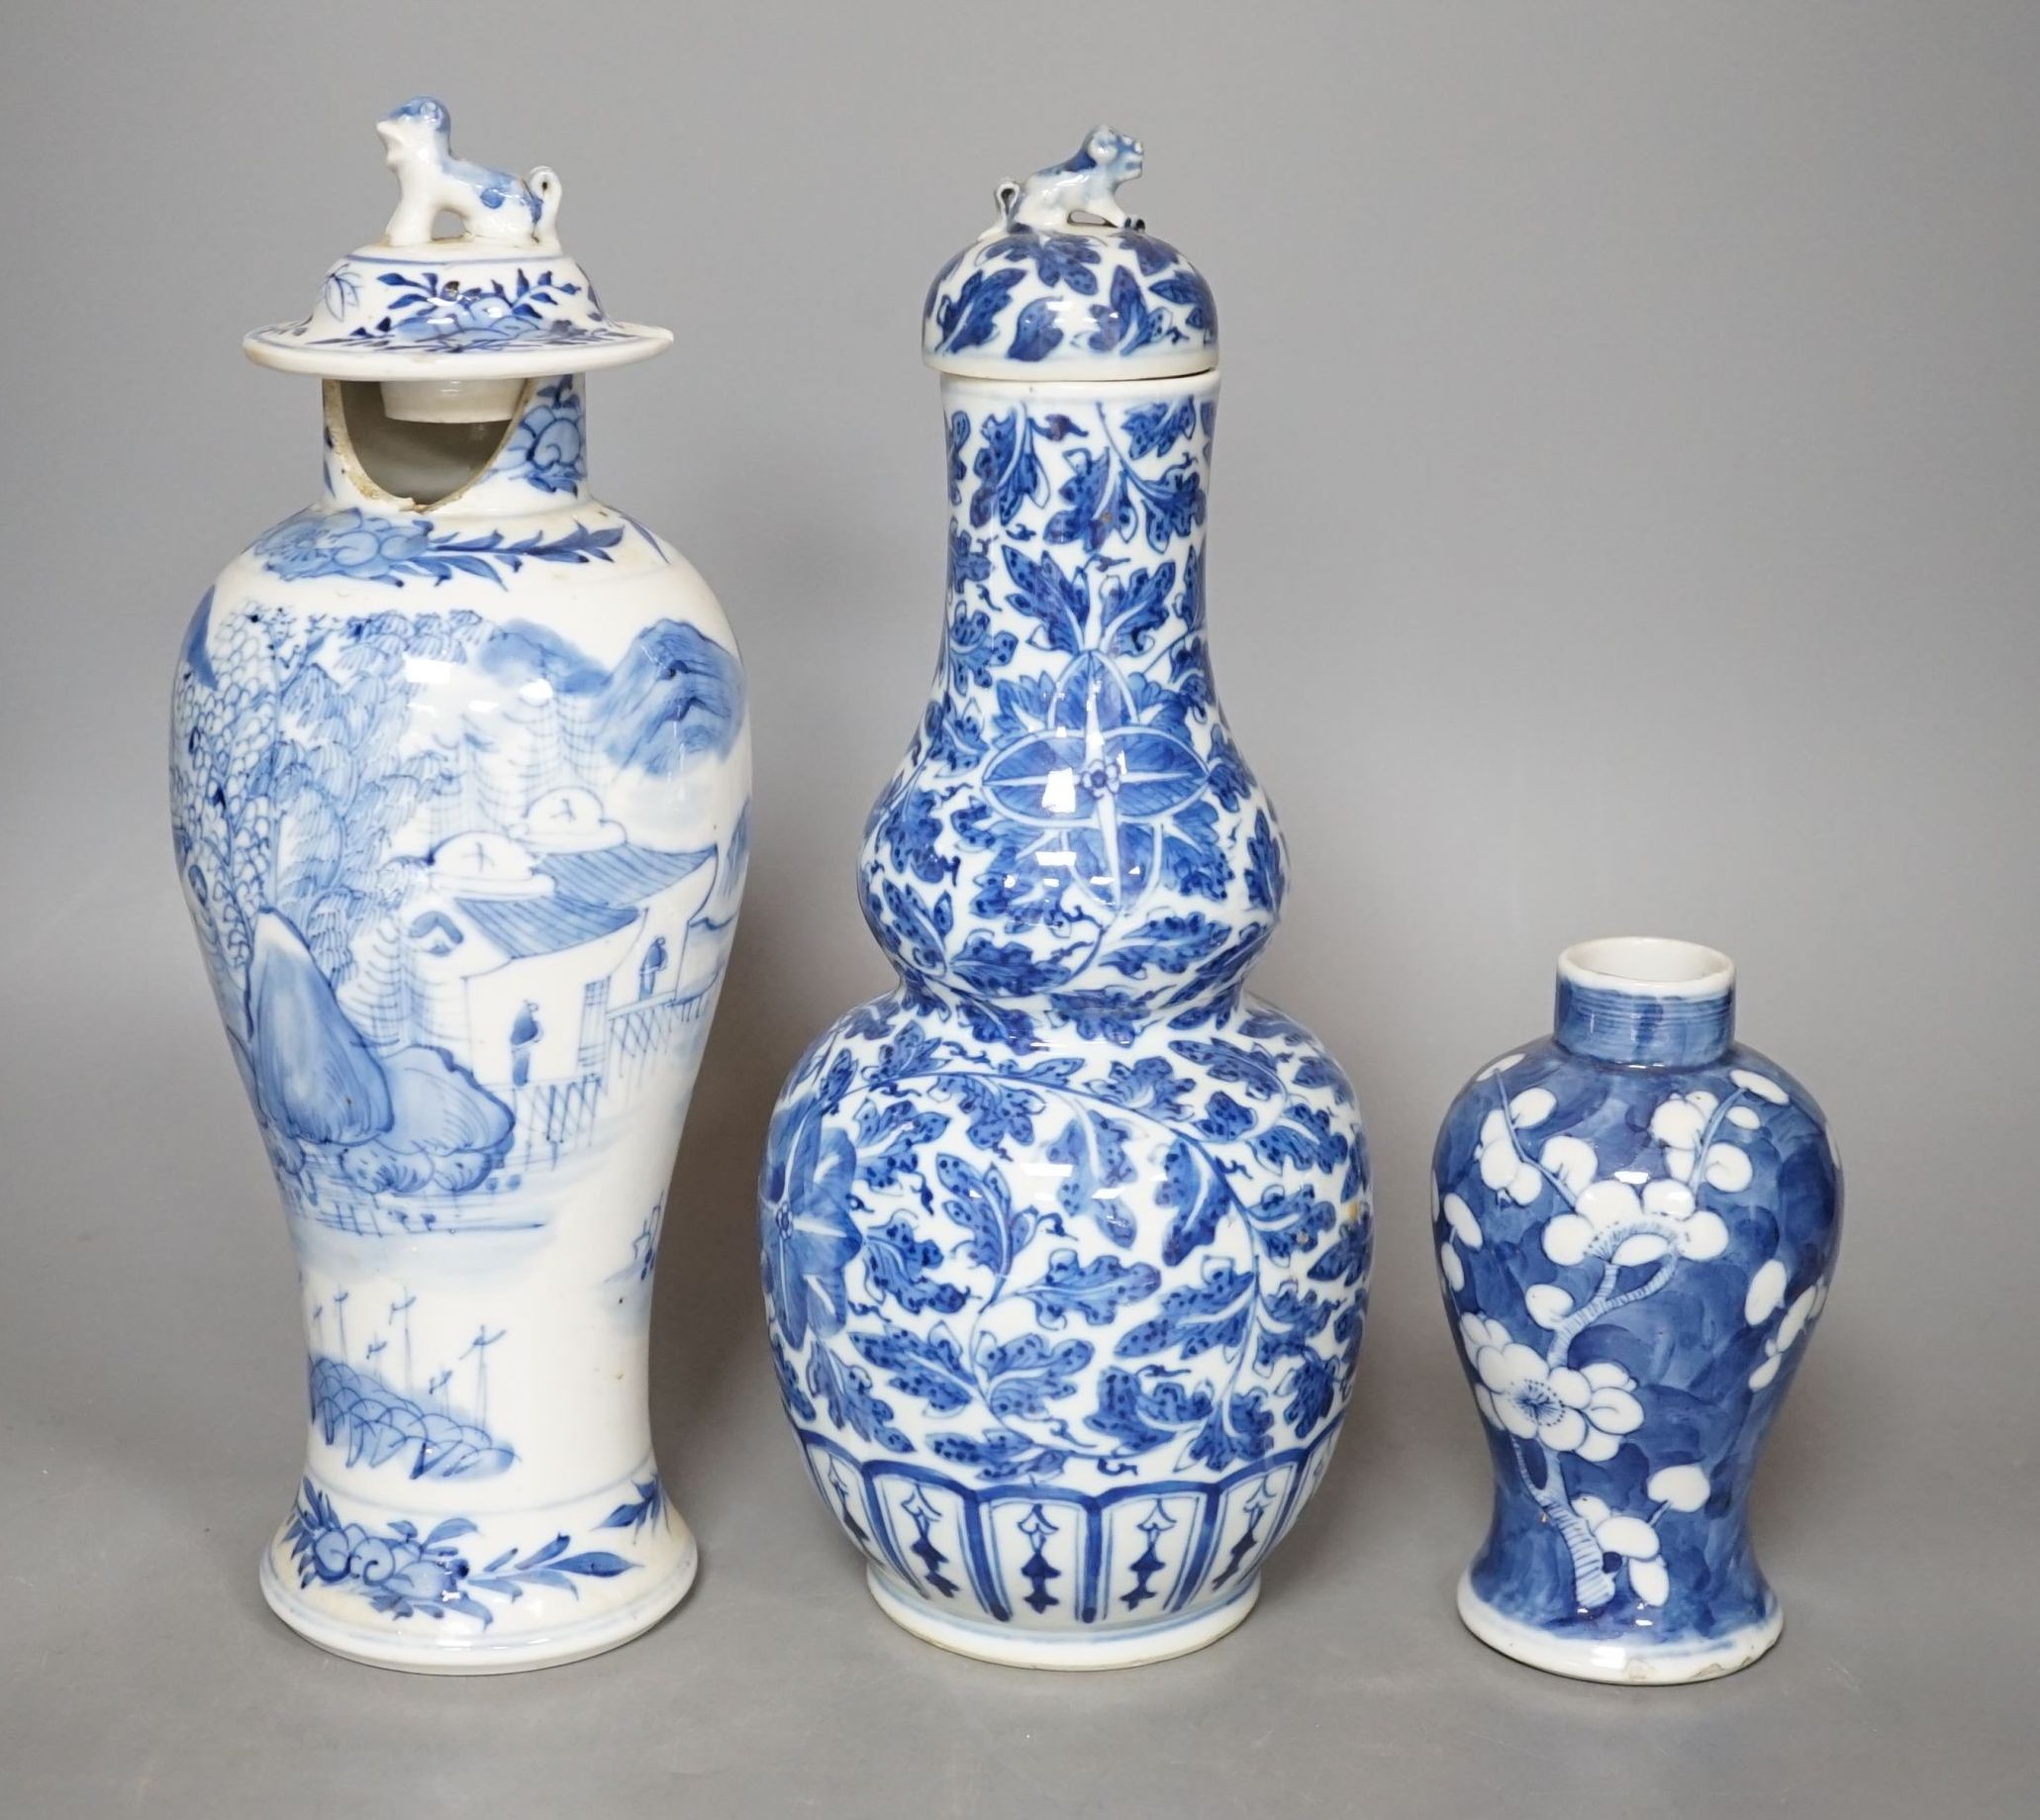 A Chinese double gourd vase and cover, a similar vase and cover and a prunus vase, all 19th century, tallest 28 cms high.